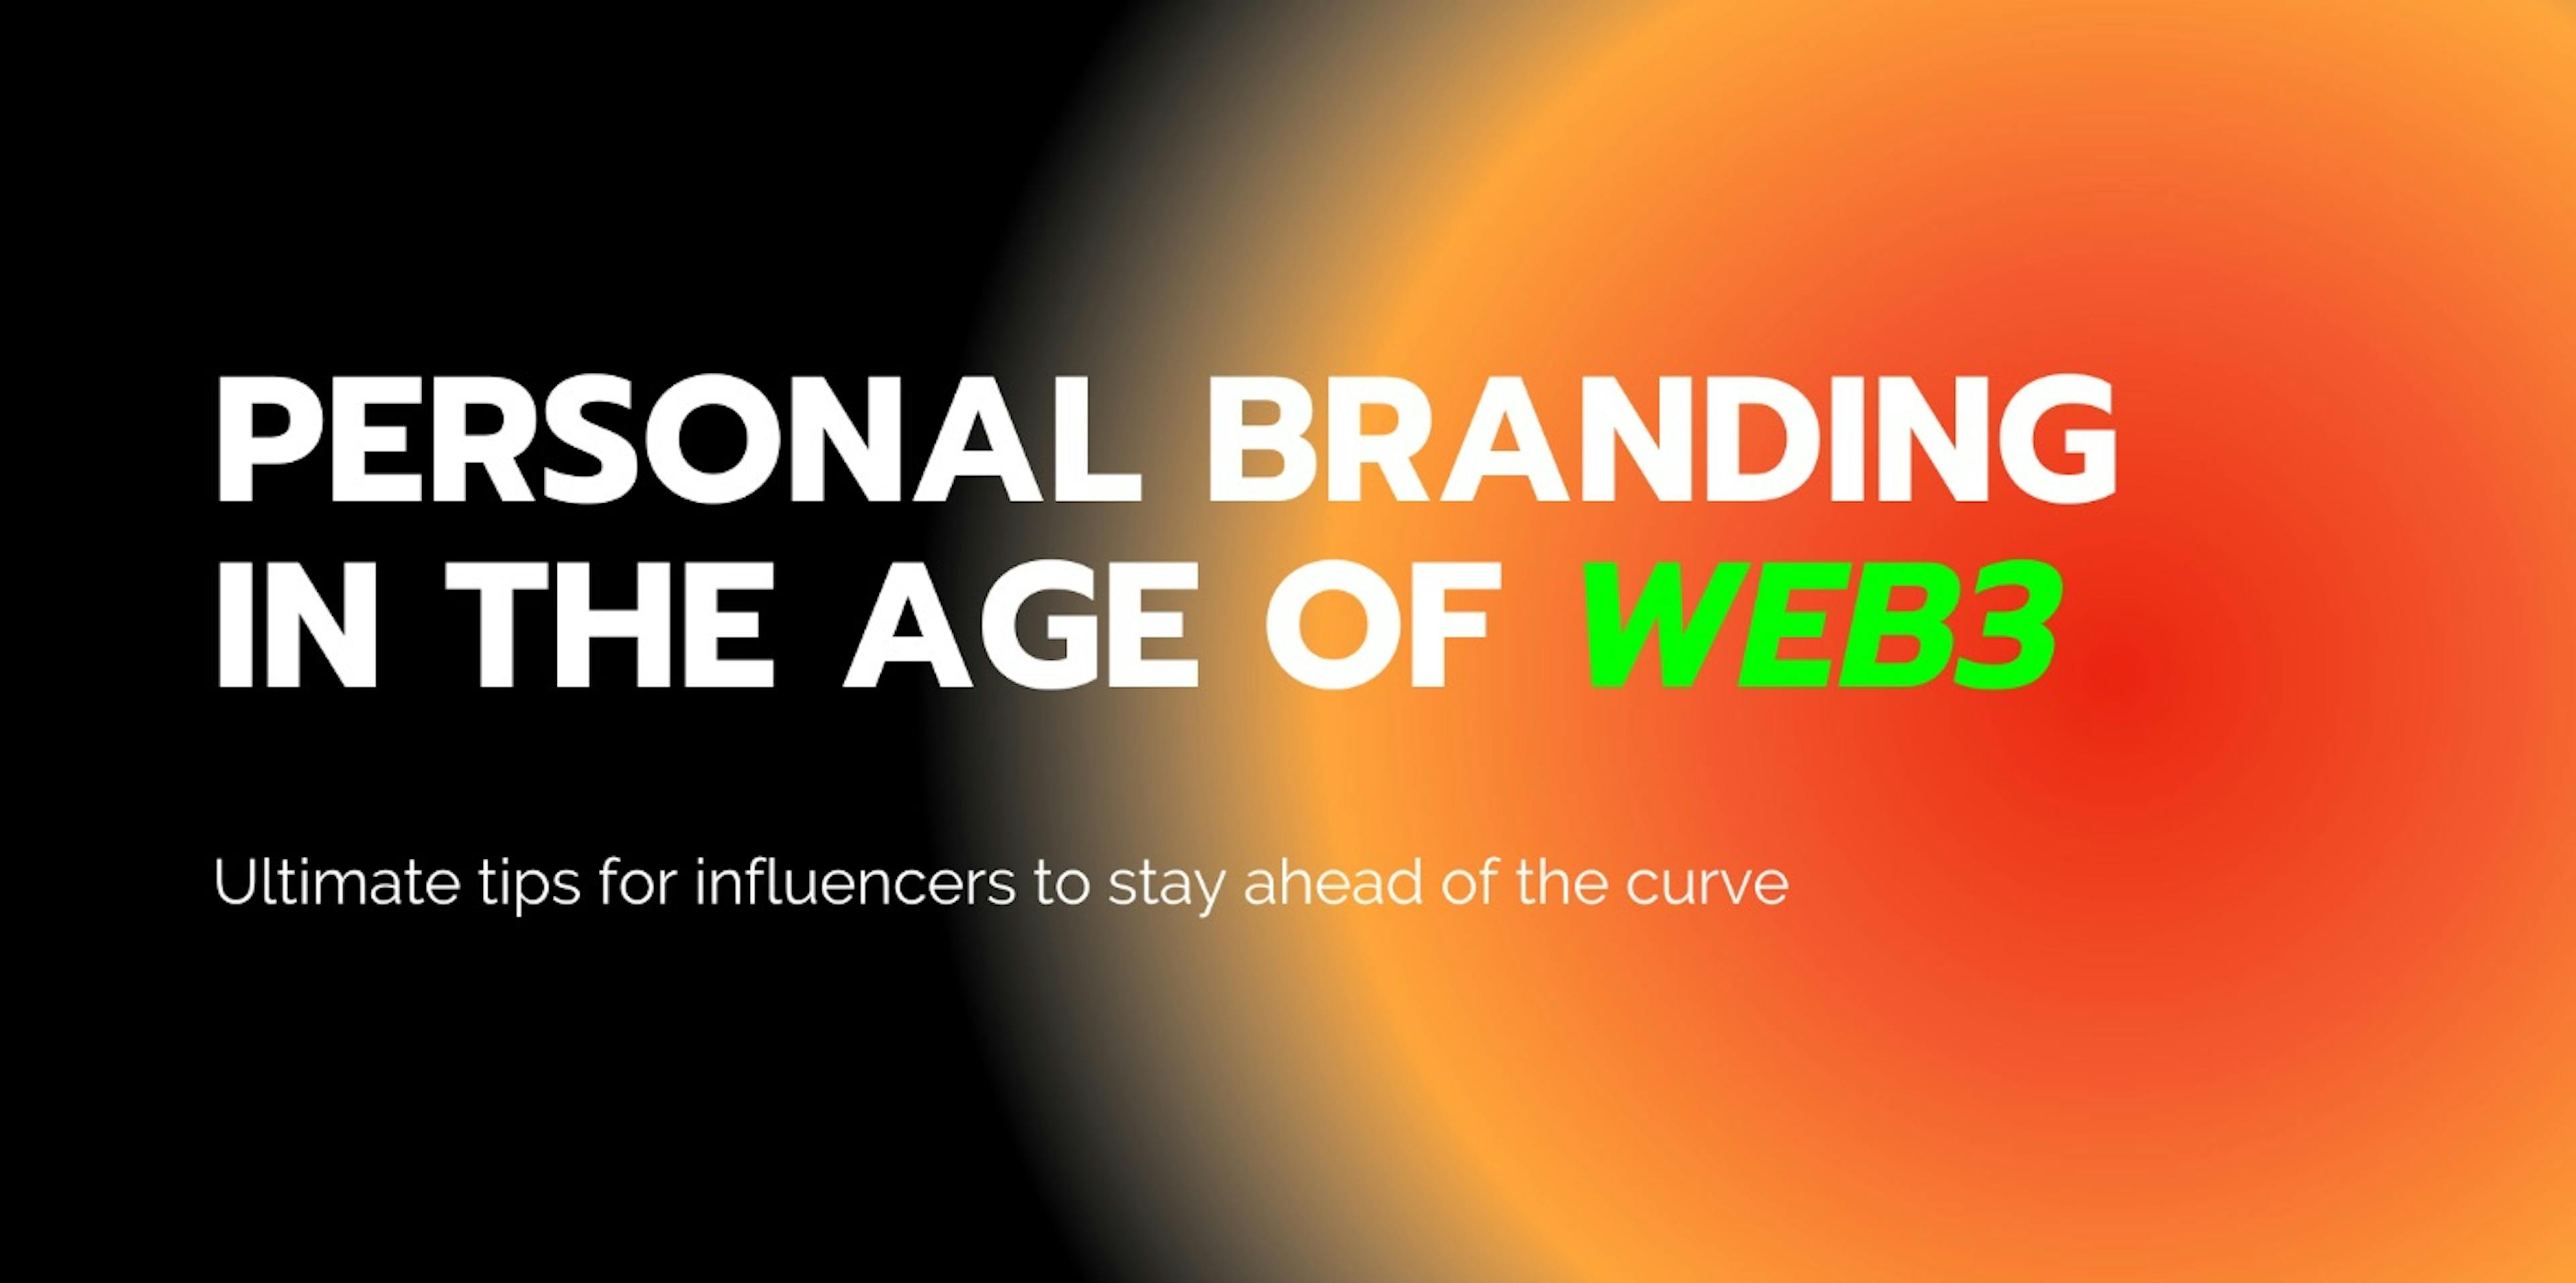 featured image - Personal Branding in the Age of Web3: Tips to Stay Ahead of the Curve